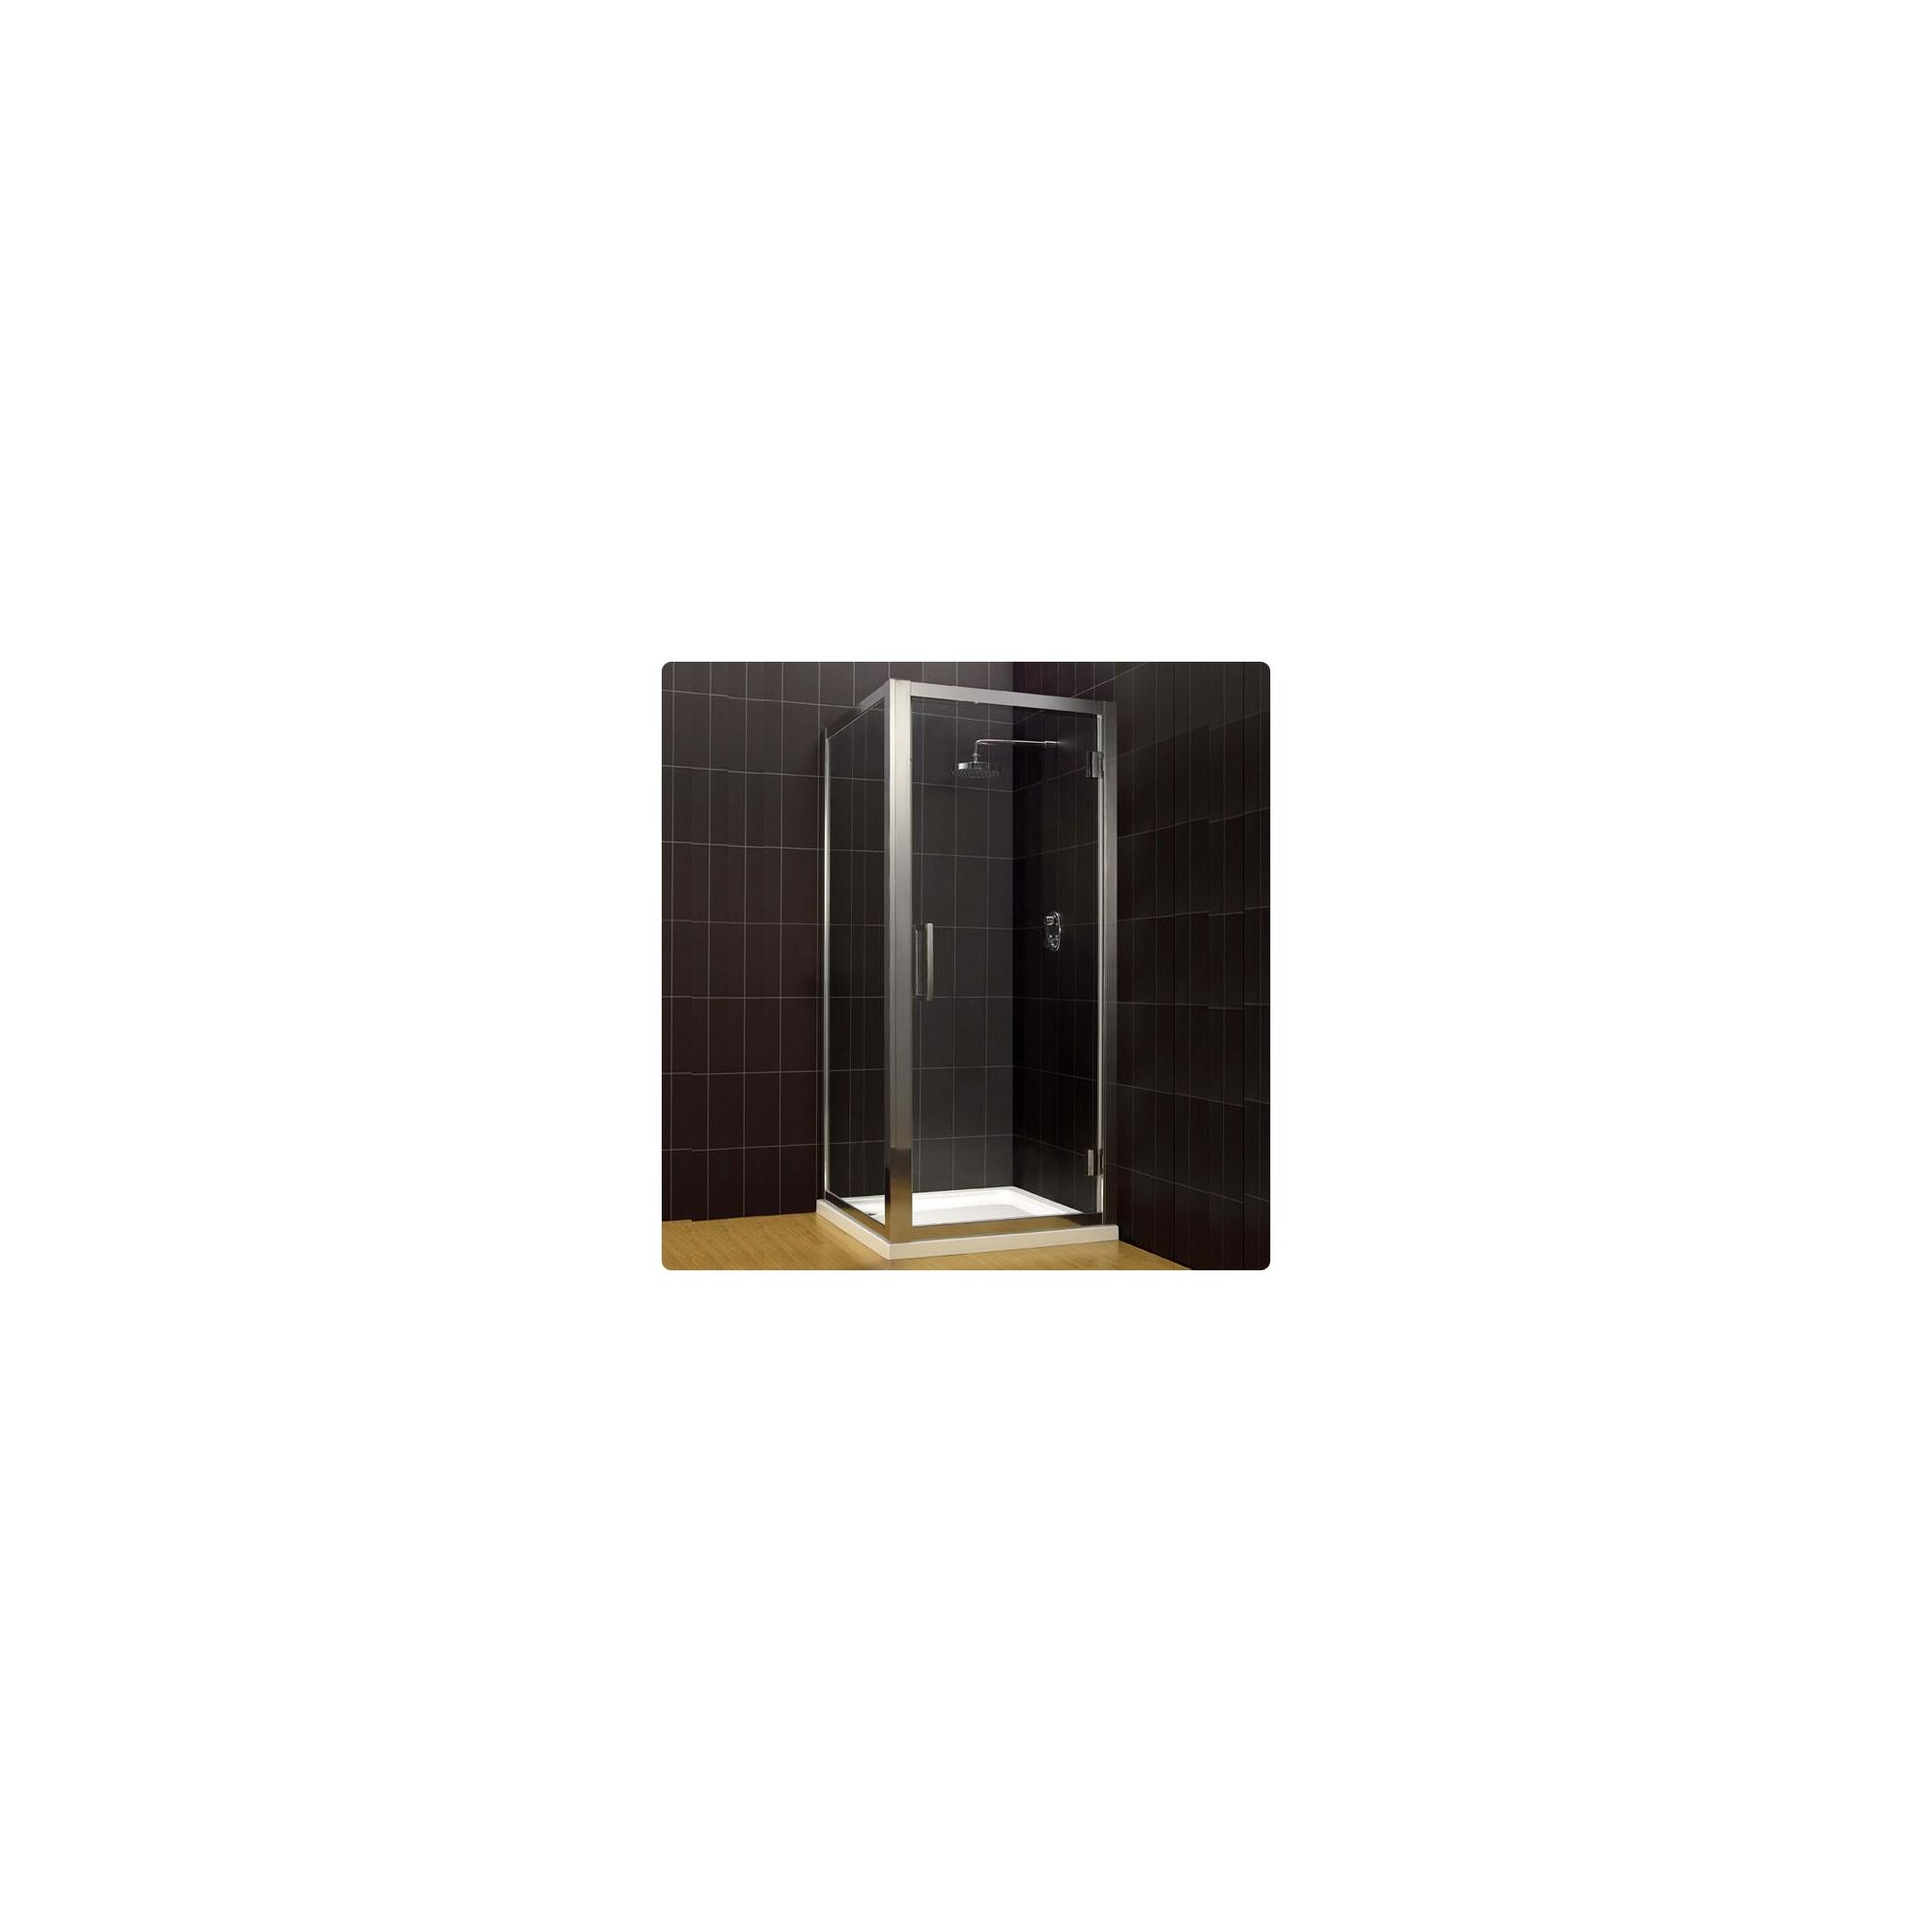 Duchy Supreme Silver Hinged Door Shower Enclosure with Towel Rail, 760mm x 760mm, Standard Tray, 8mm Glass at Tesco Direct